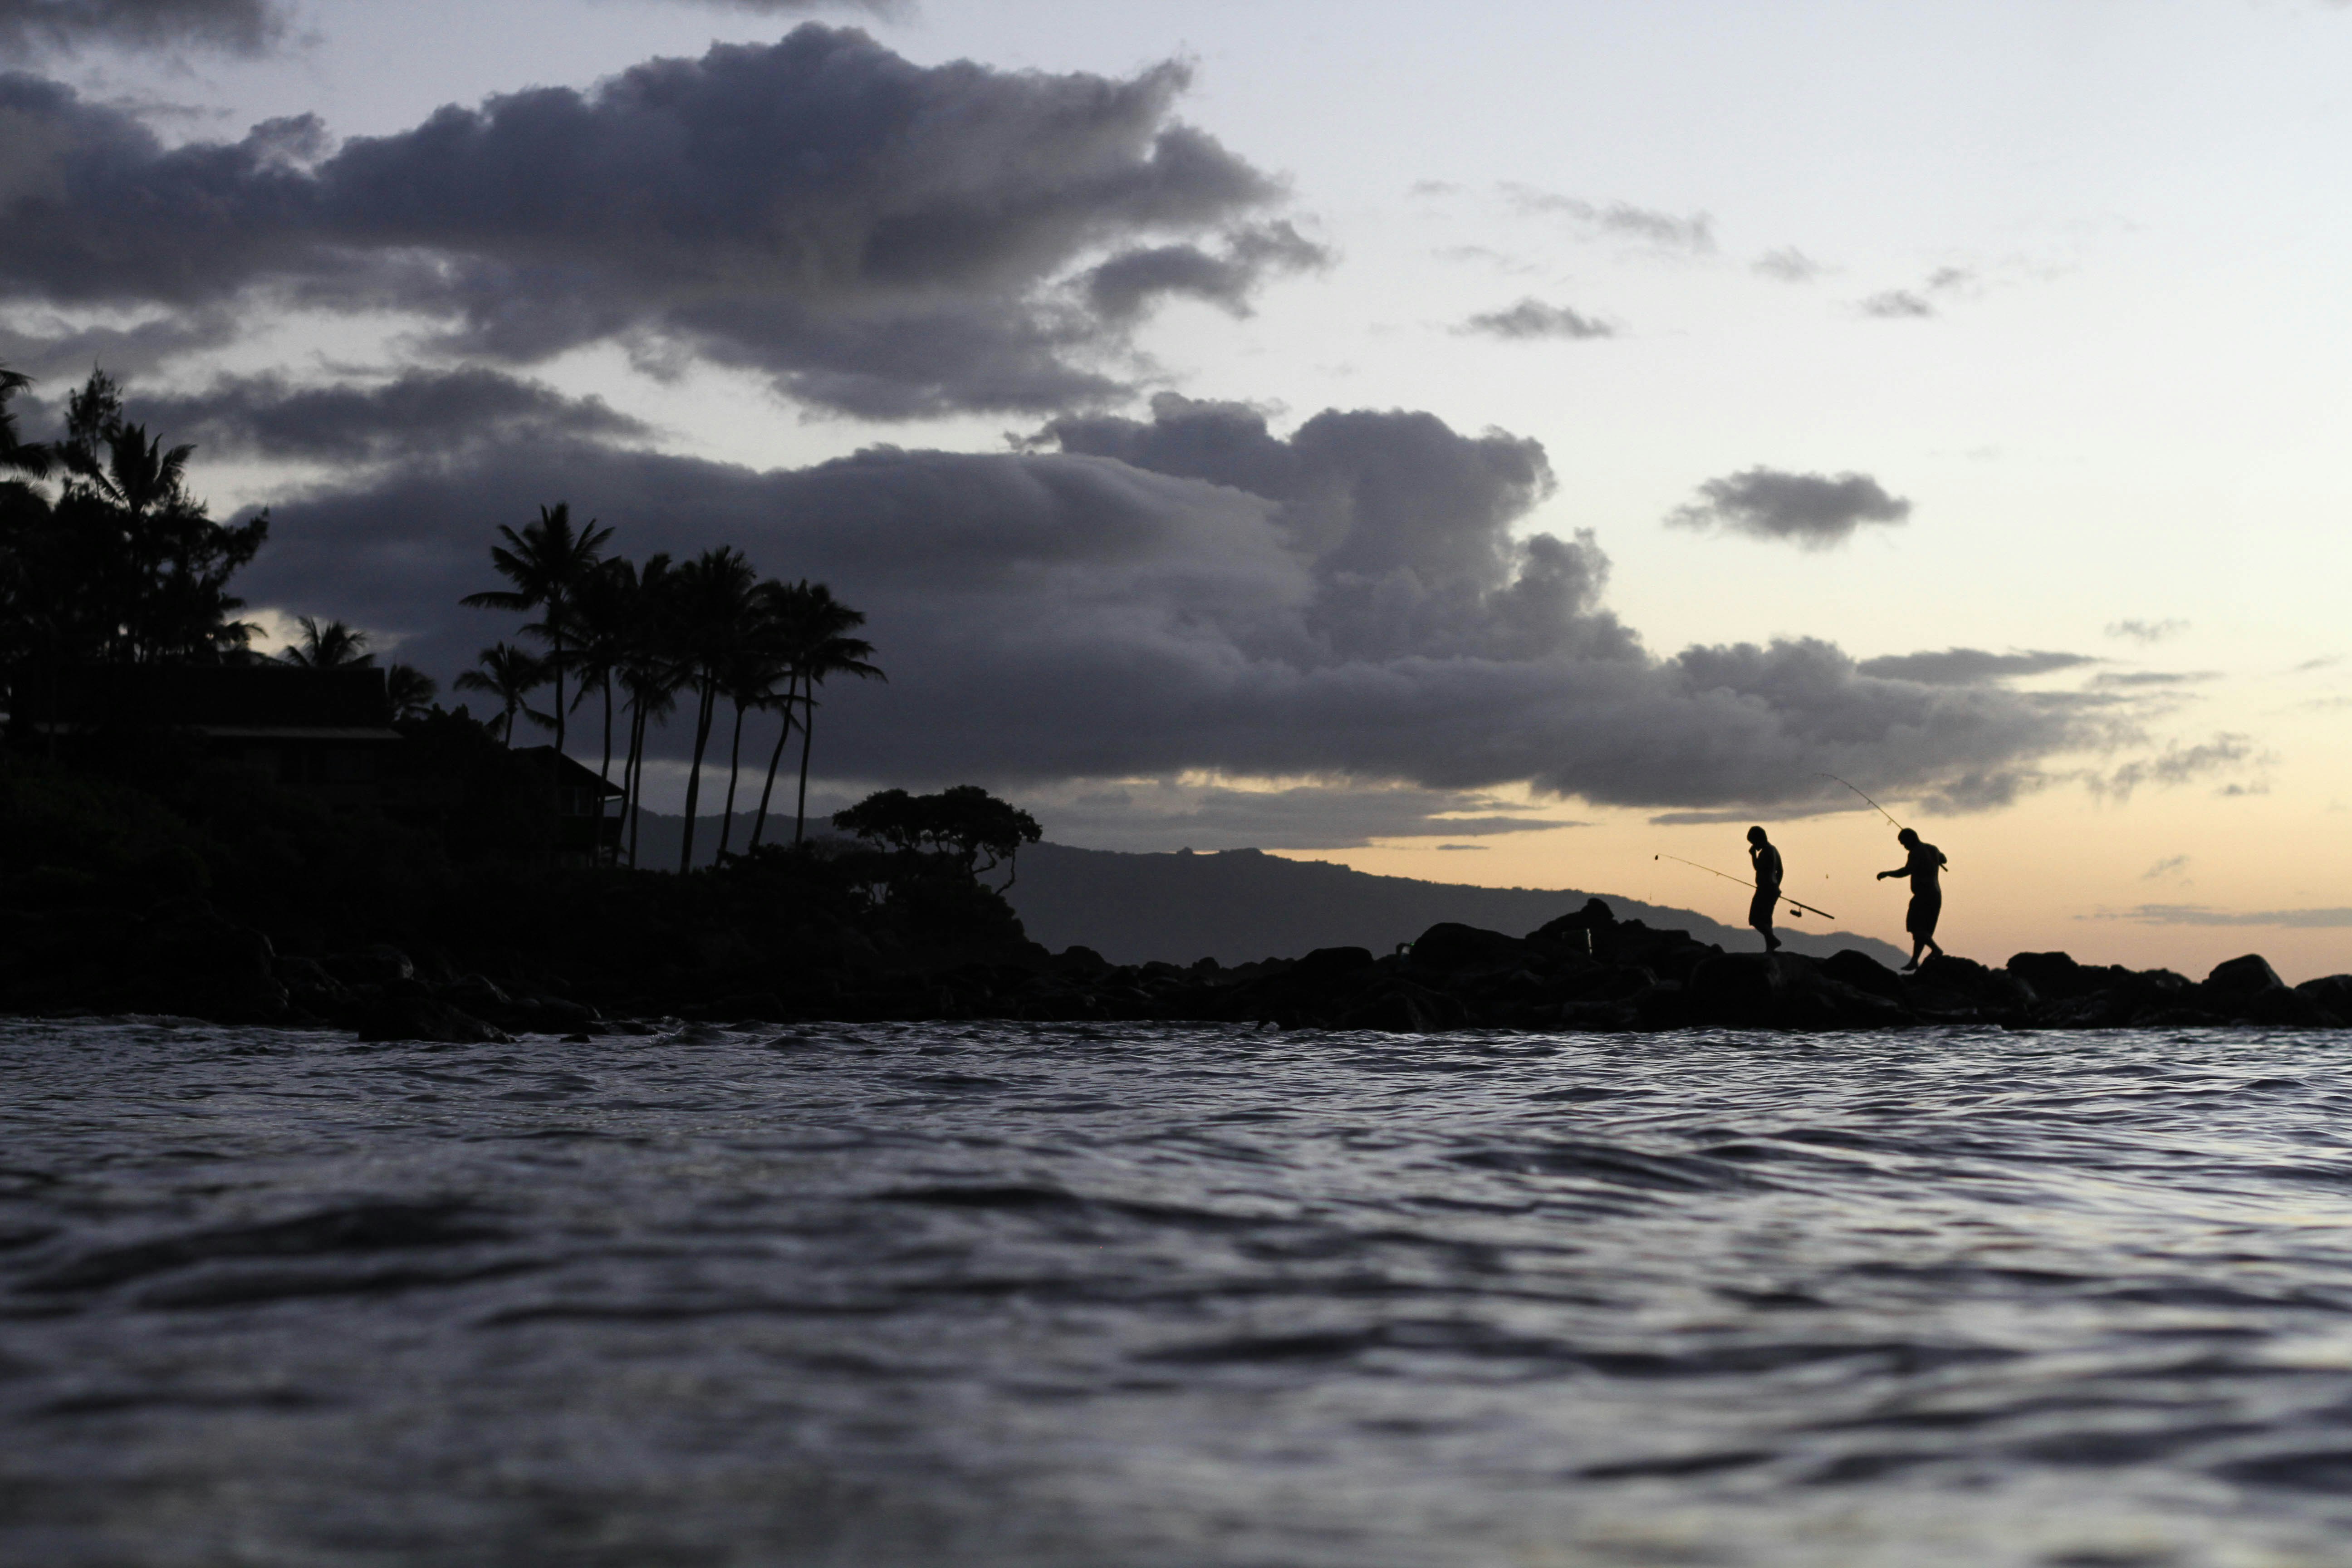 People out in the ocean in Hawaii.